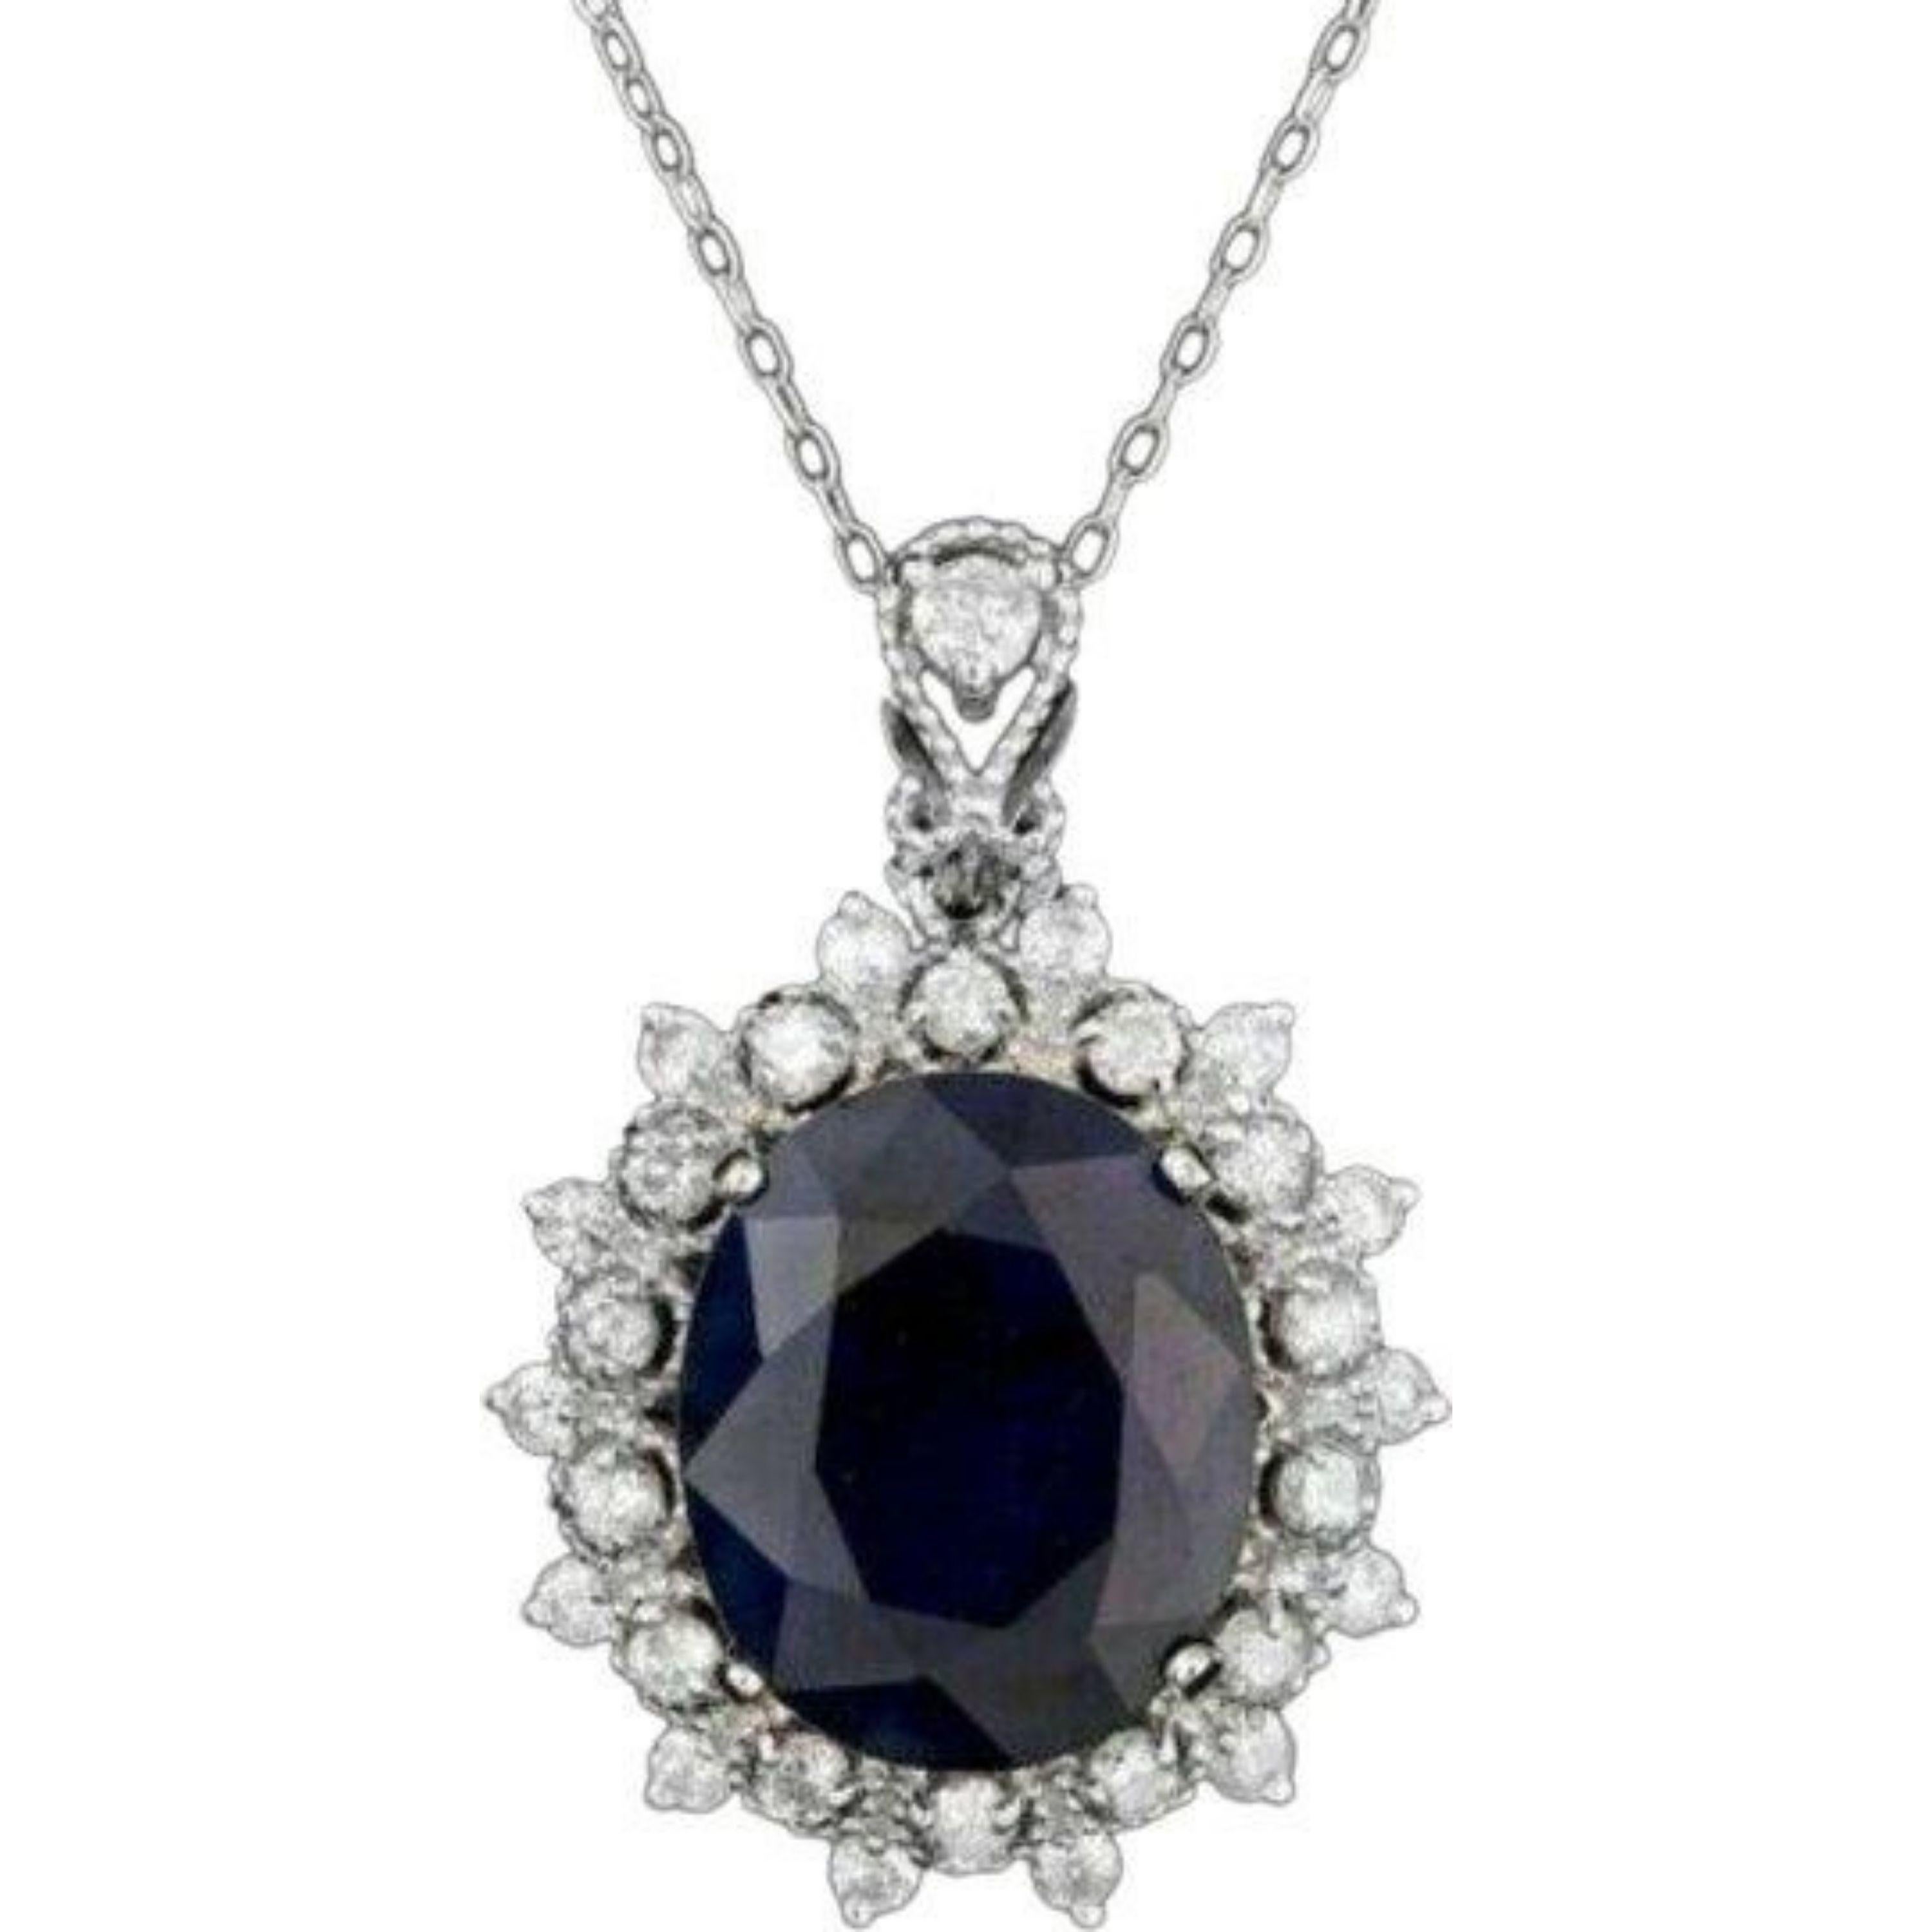 9.30Ct Natural Sapphire and Diamond 14K Solid White Gold Necklace

Amazing looking piece!

Stamped: 14K

Natural Oval Cut Sapphire Weights: Approx. 8.50 Carats

Sapphire Measures: Approx. 13 x 11mm

Total Natural Round Diamond weights: Approx. 0.80